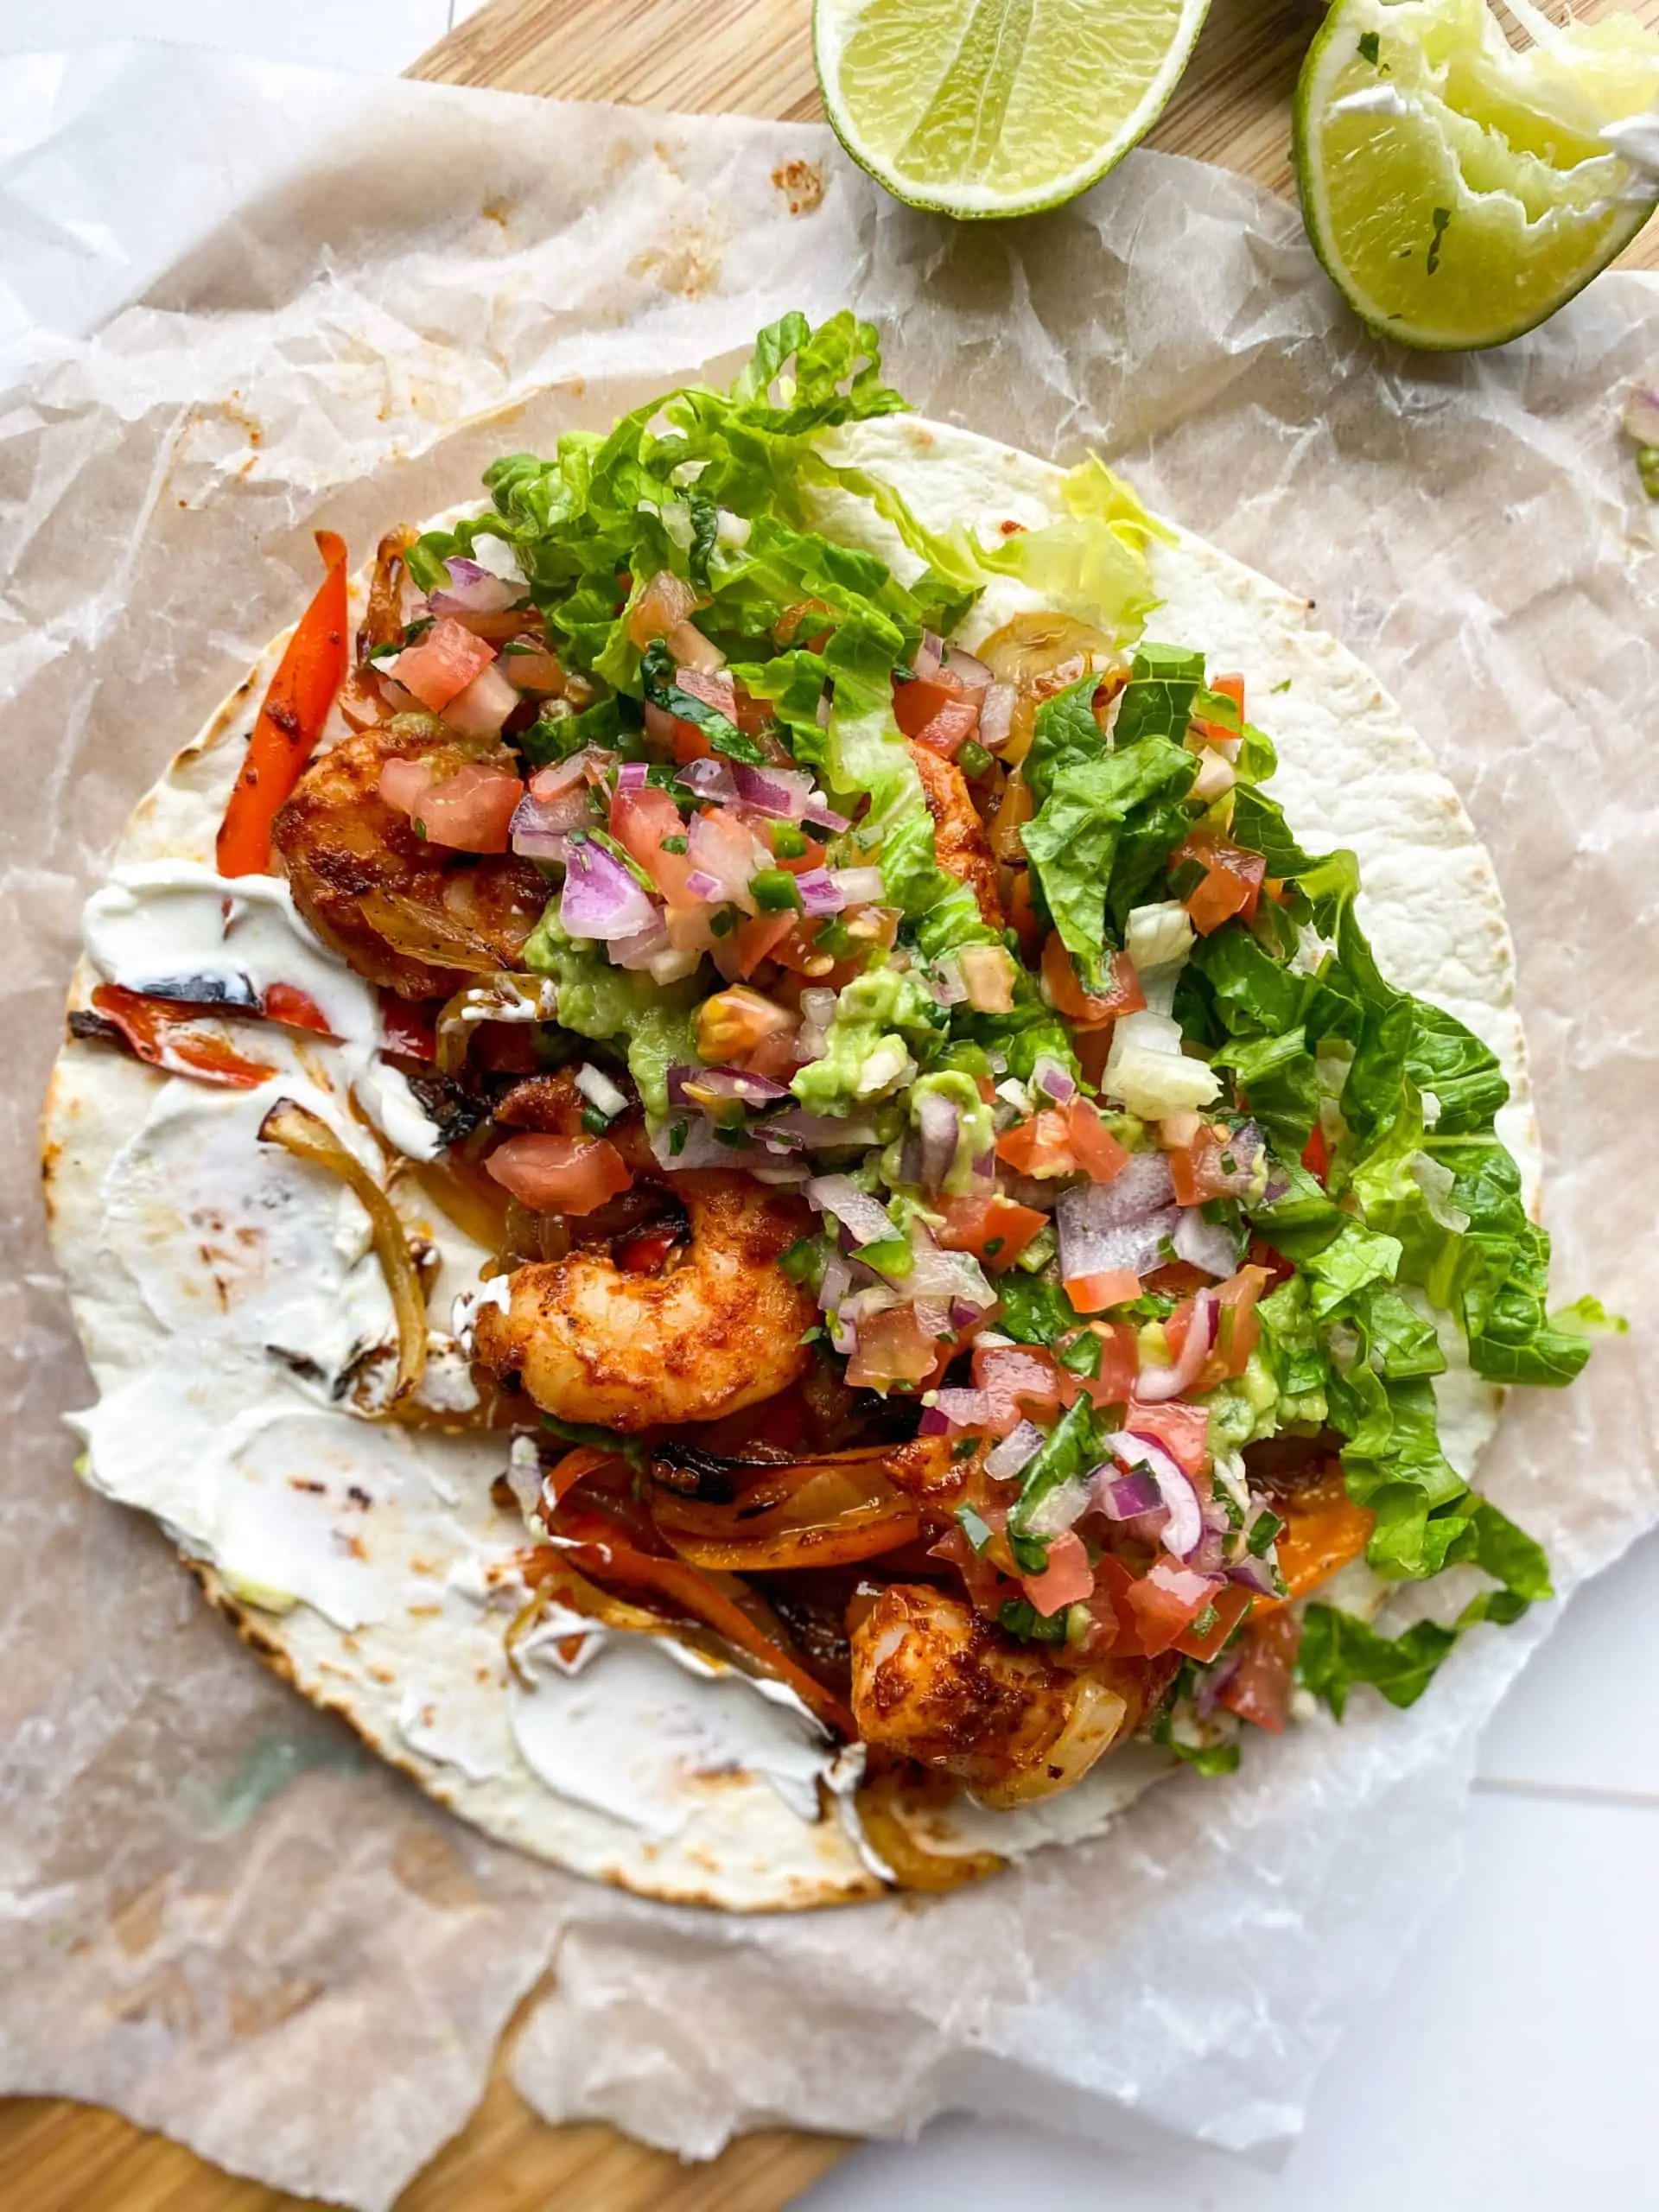 Shrimp Fajitas on a parchment paper with a side of squeezed lime